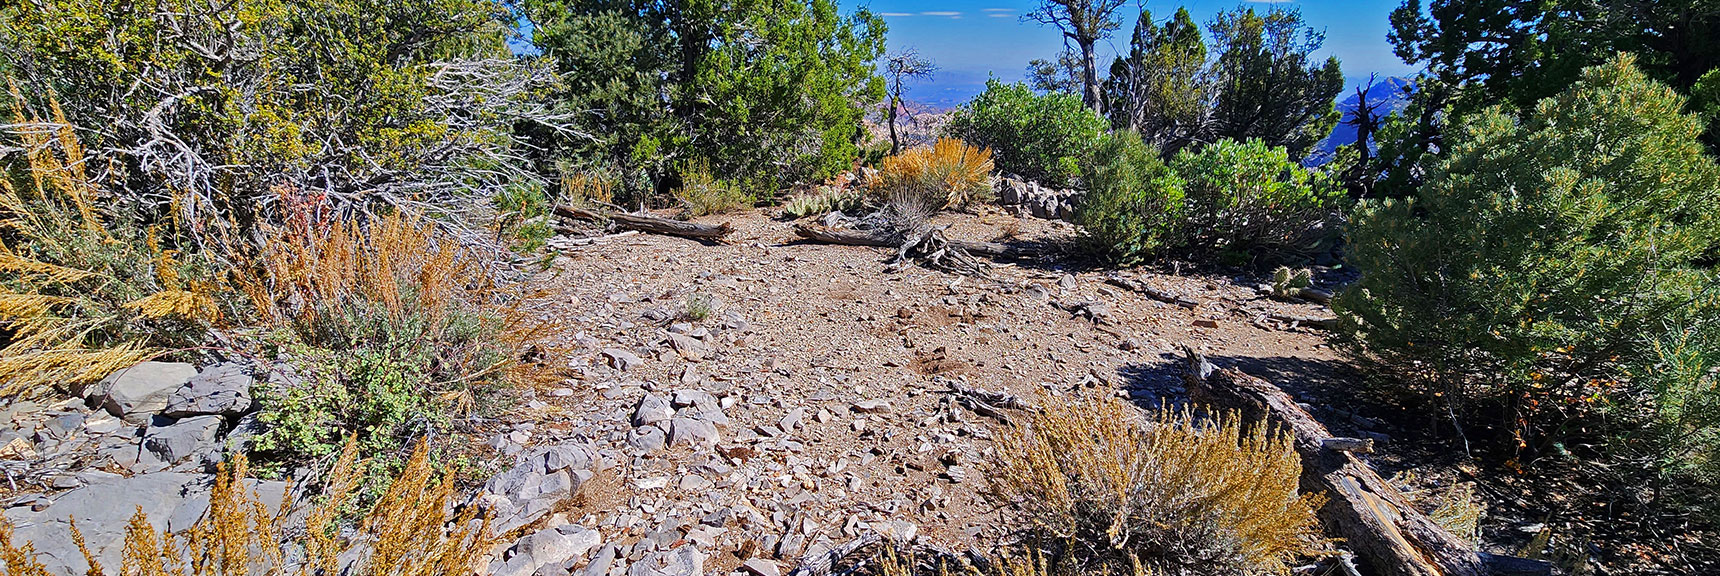 This May Be an Ancient Native American Summer Dwelling Space. Stone Border. | Switchback Spring Pinnacle | Wilson Ridge | Lovell Canyon, Nevada